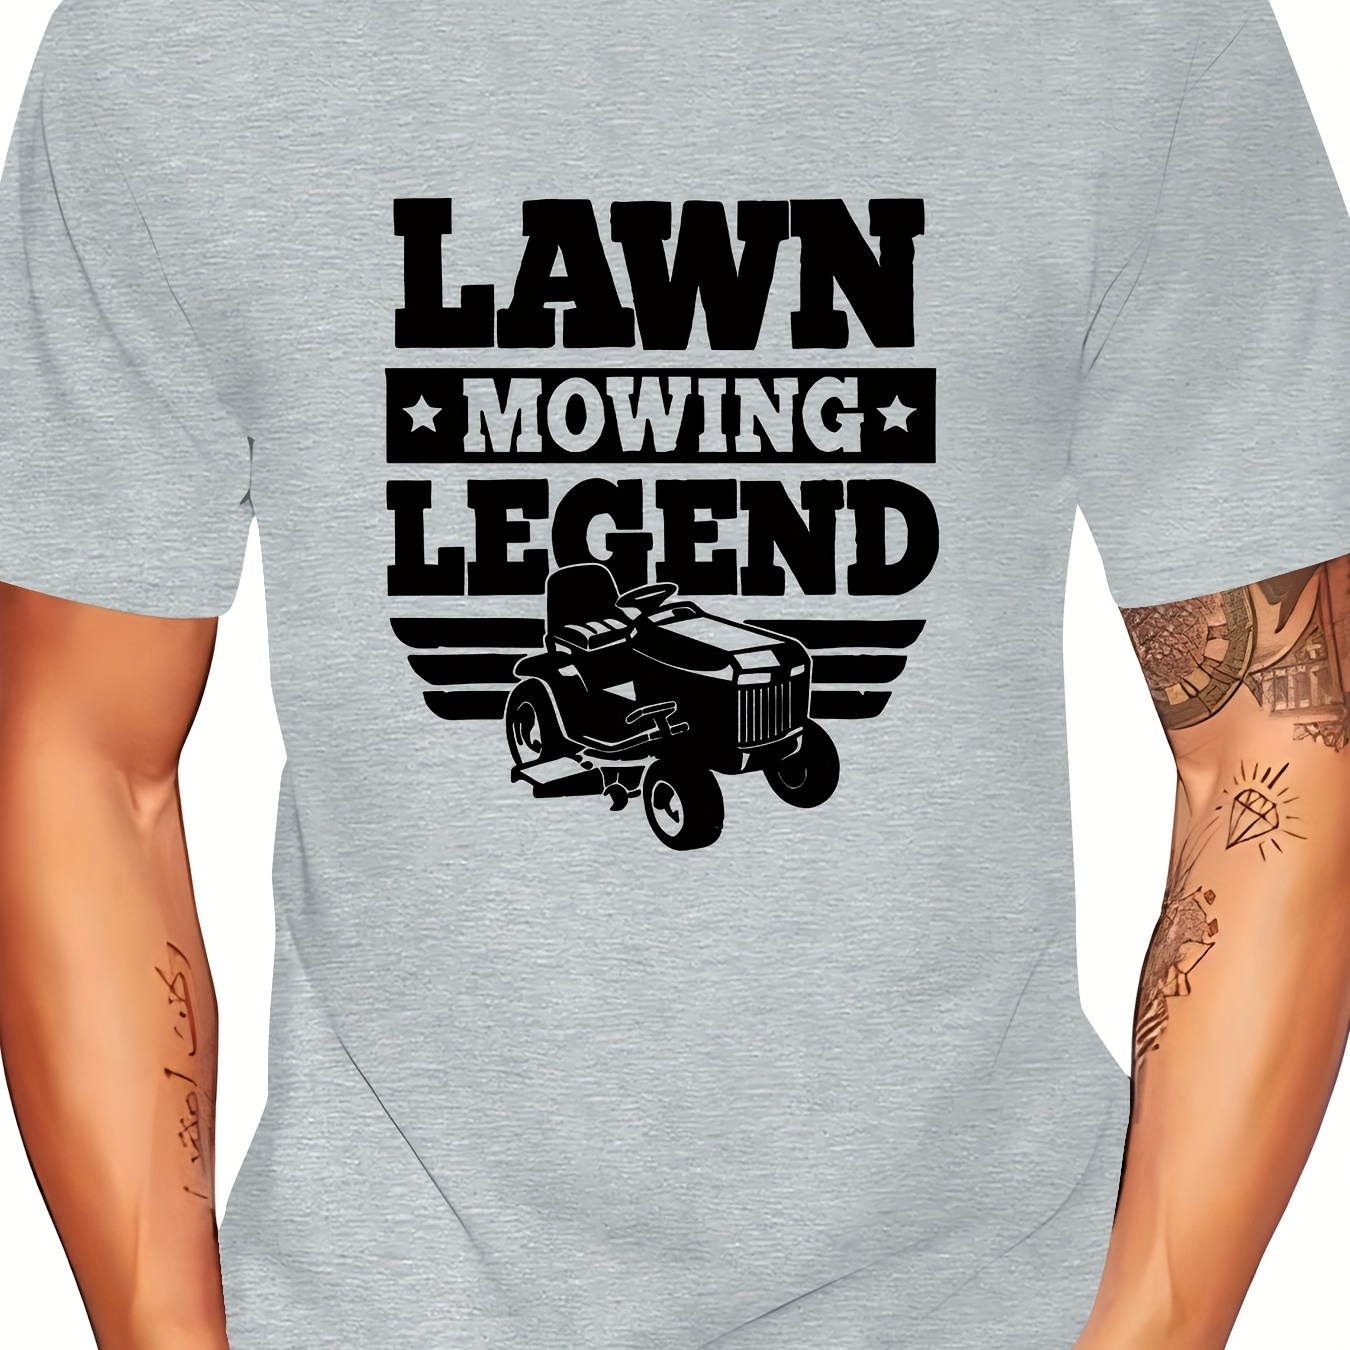 

Lawn Mowing Legend Print T Shirt, Tees For Men, Casual Short Sleeve T-shirt For Summer